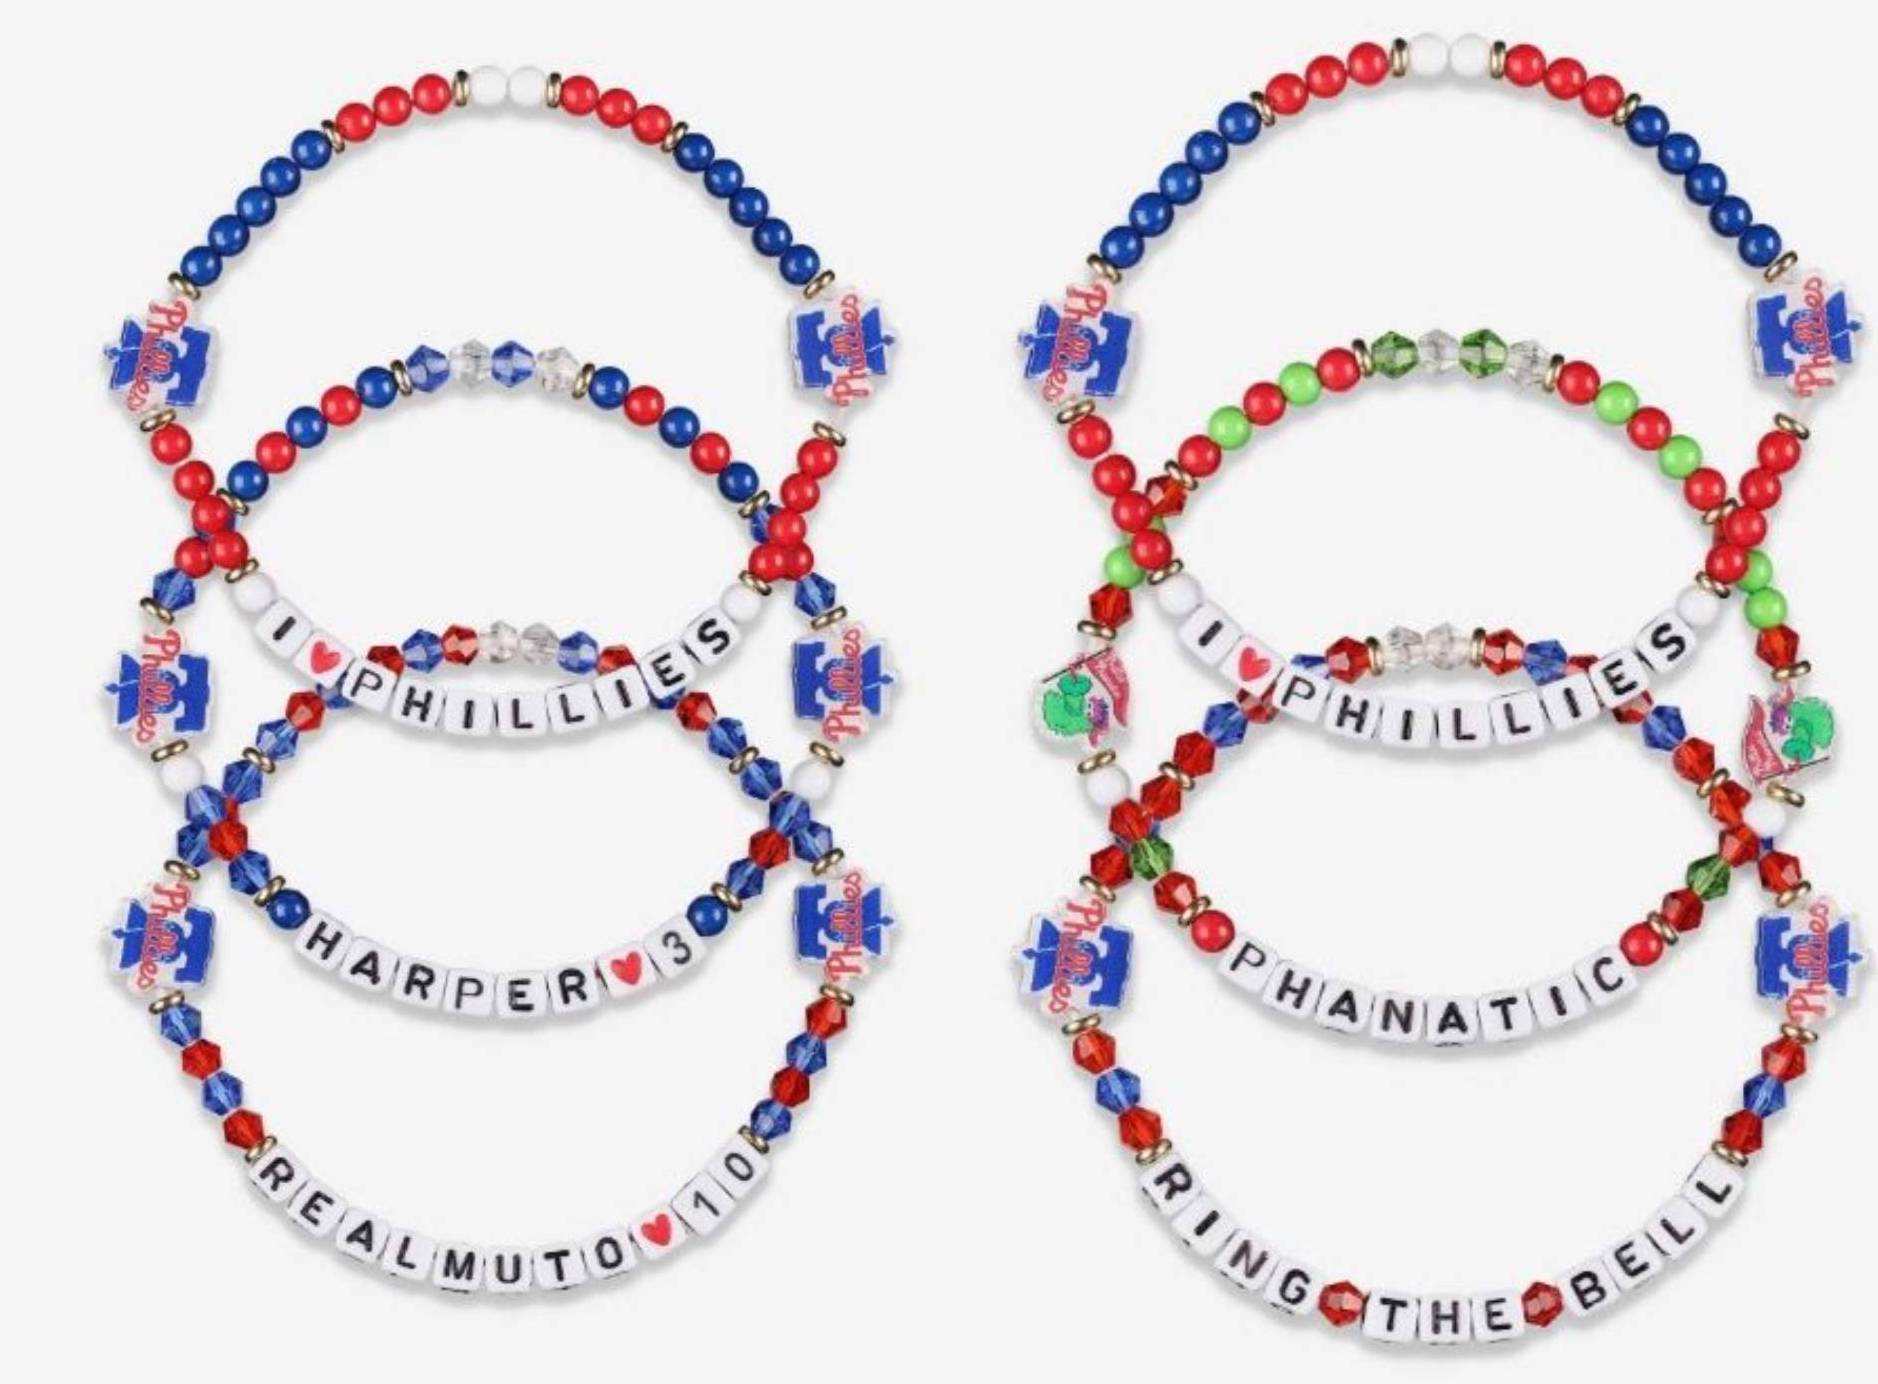 FOCO stretches into friendship bracelets with MLB teams and players 